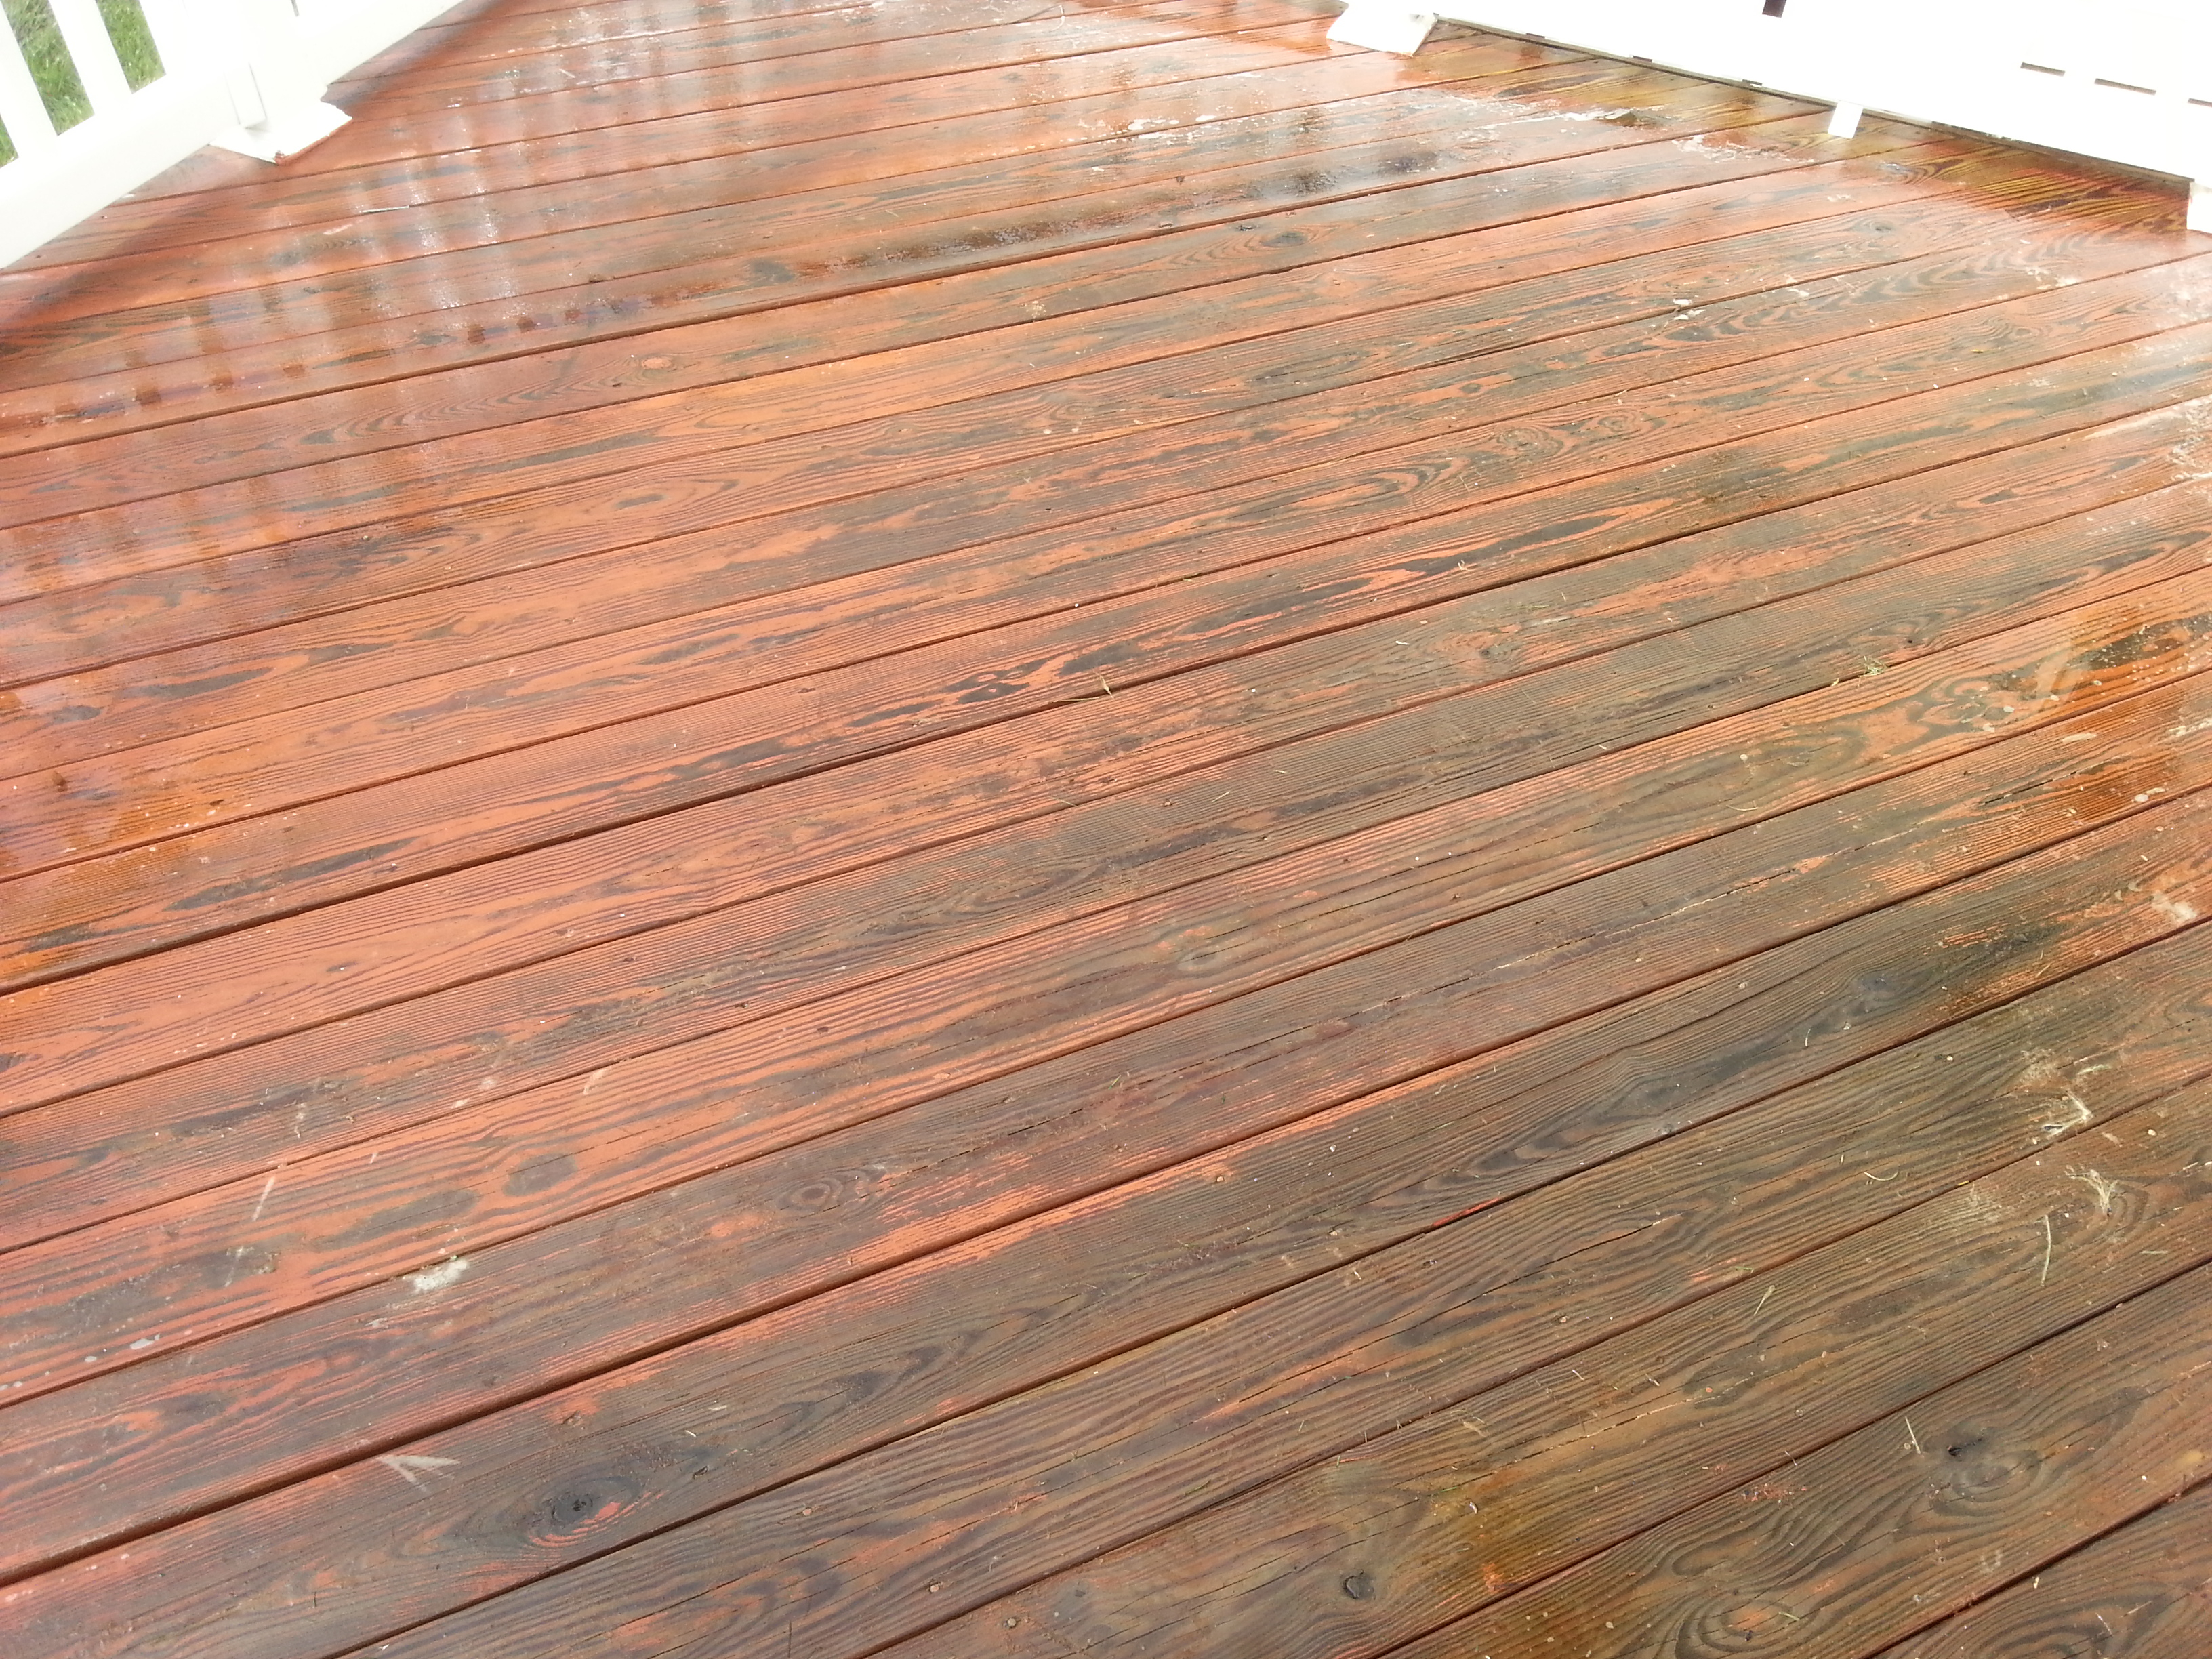 Oil Based Vs Water Based Deck Stain Mycoffeepot intended for dimensions 3264 X 2448